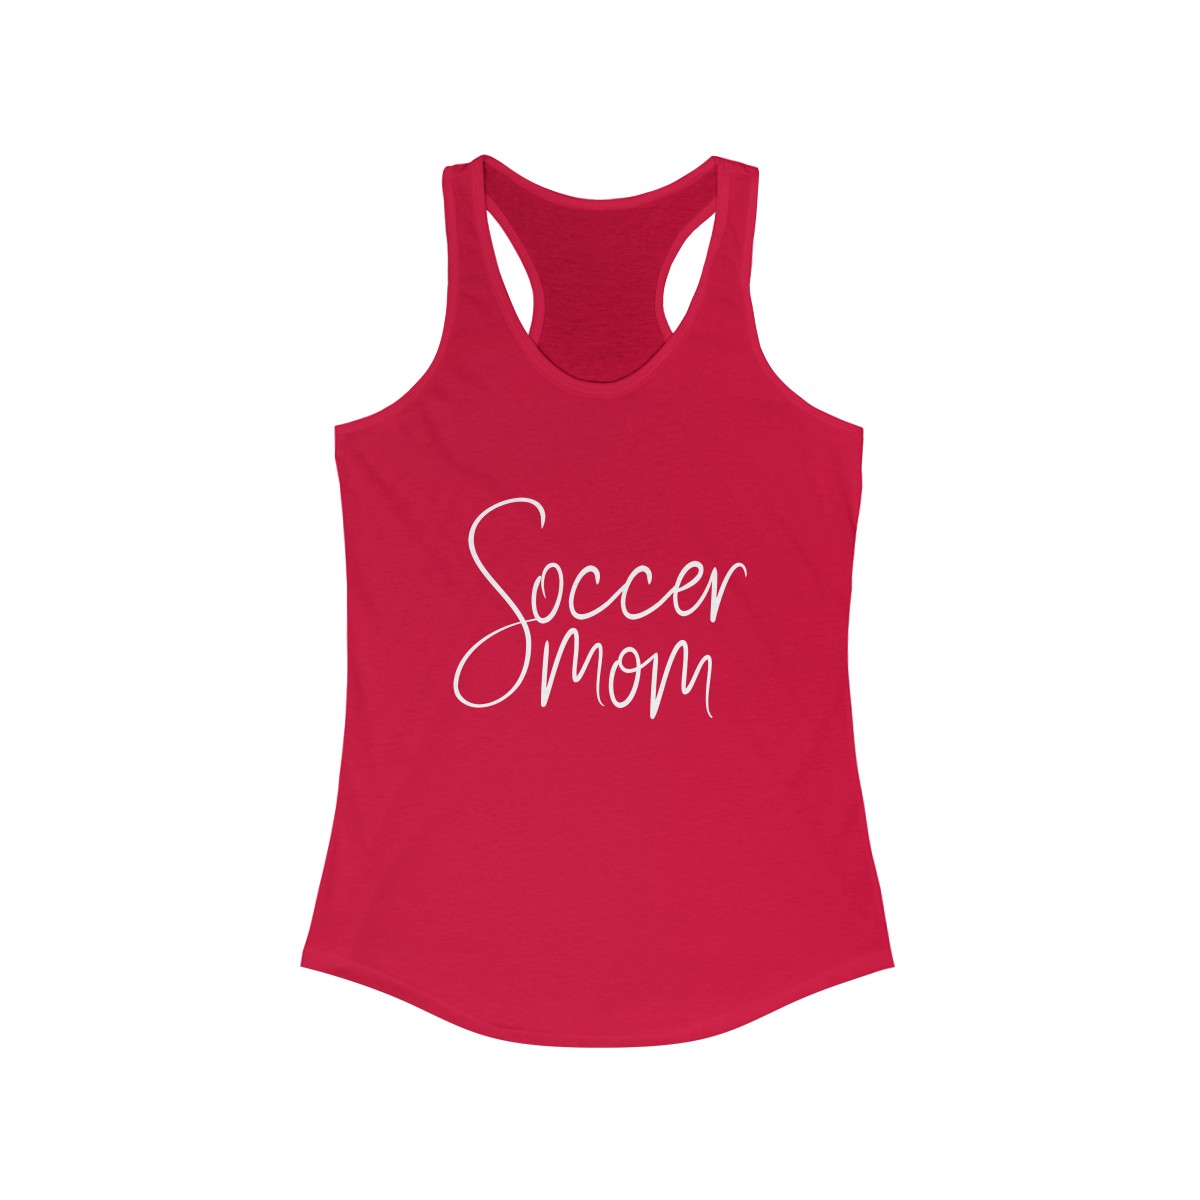 SMALL Soccer Women Shirt Racerback Tank - Soccer for Women Ages 30 to 80+